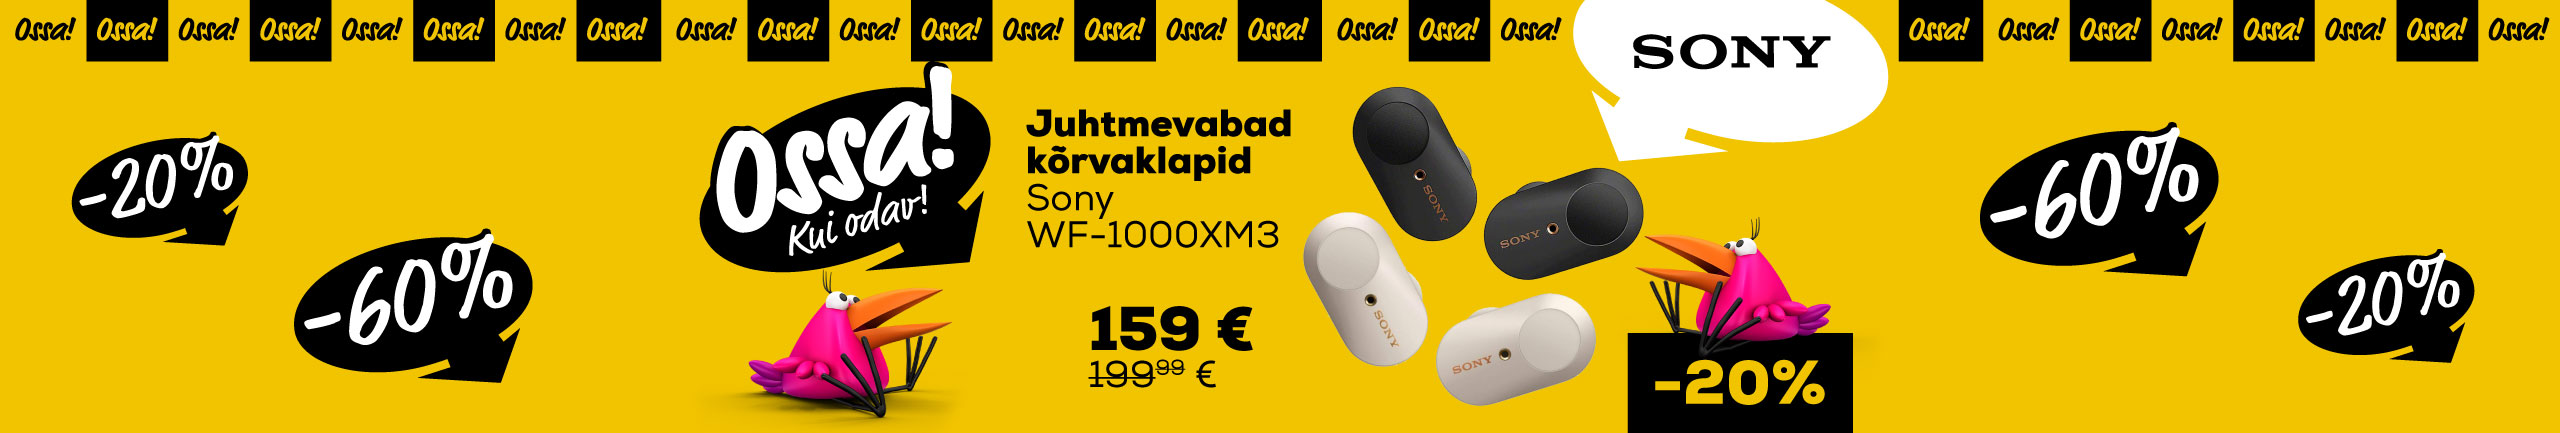 NPL Ossa extended! We added new products! Ossa extended! True wireless headphones Sony